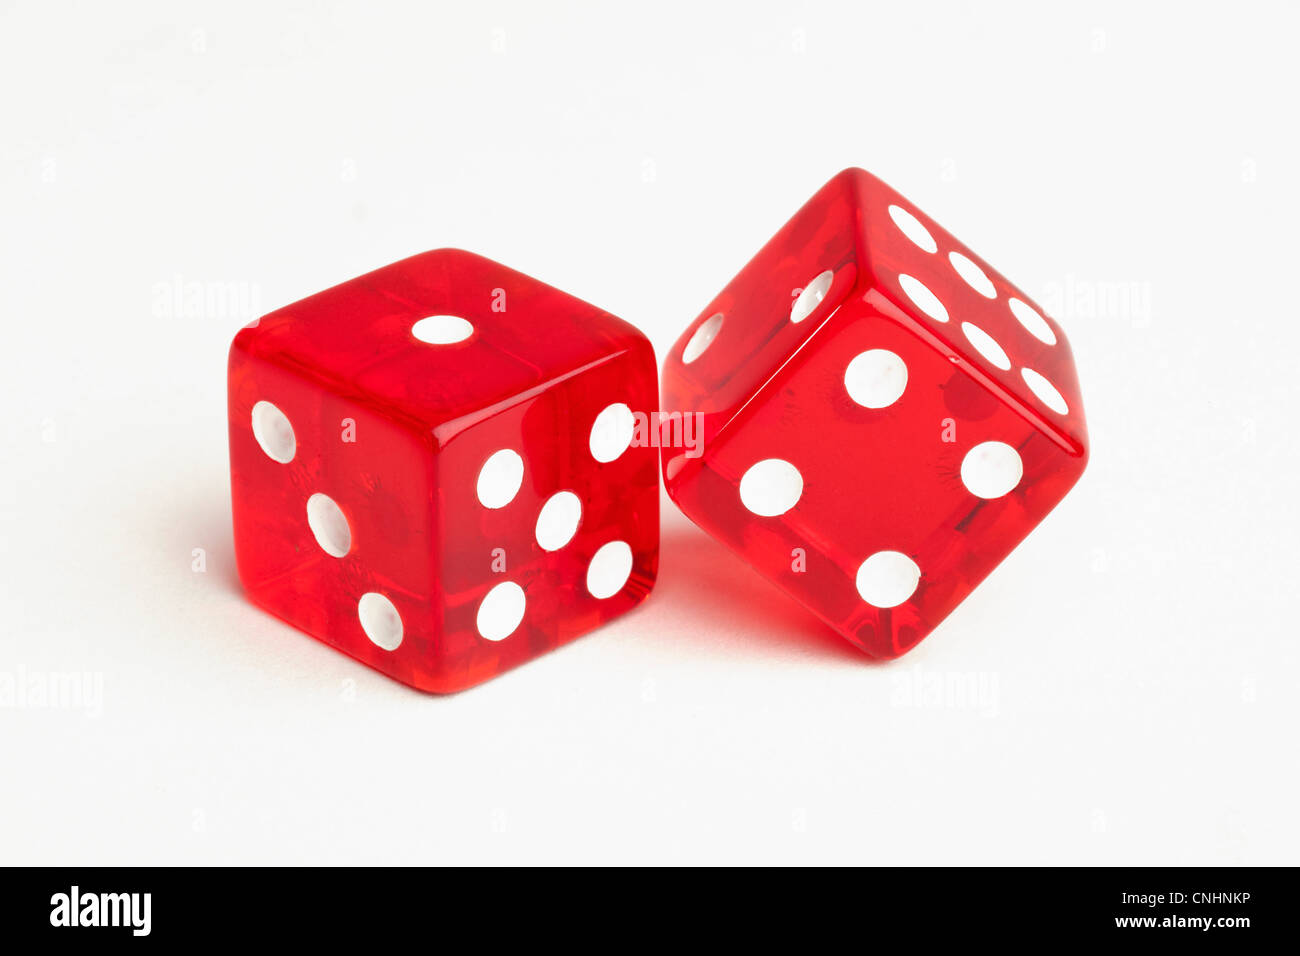 Two red dice Stock Photo